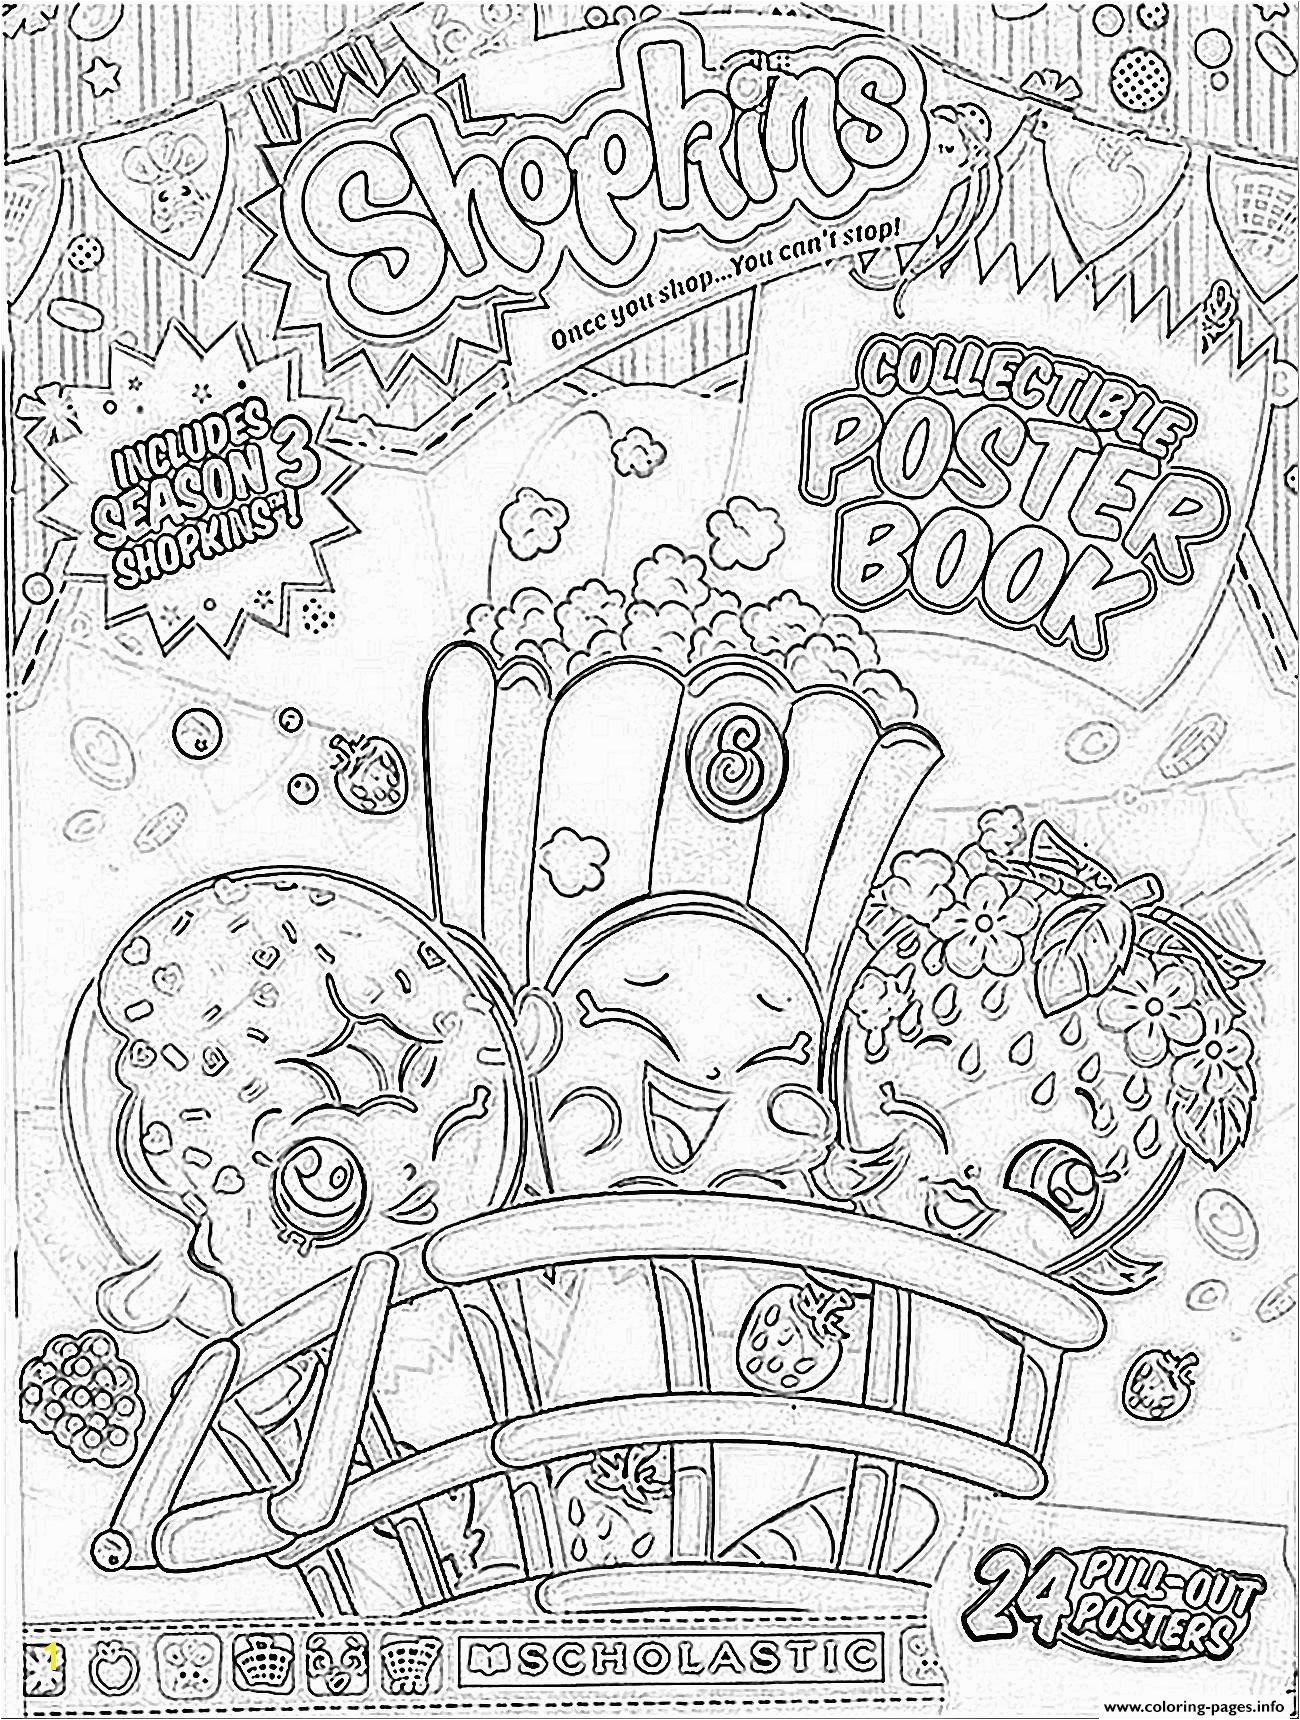 Piston Cup Coloring Page Beautiful Piston Cup Coloring Page Stock Printable Coloring Pages